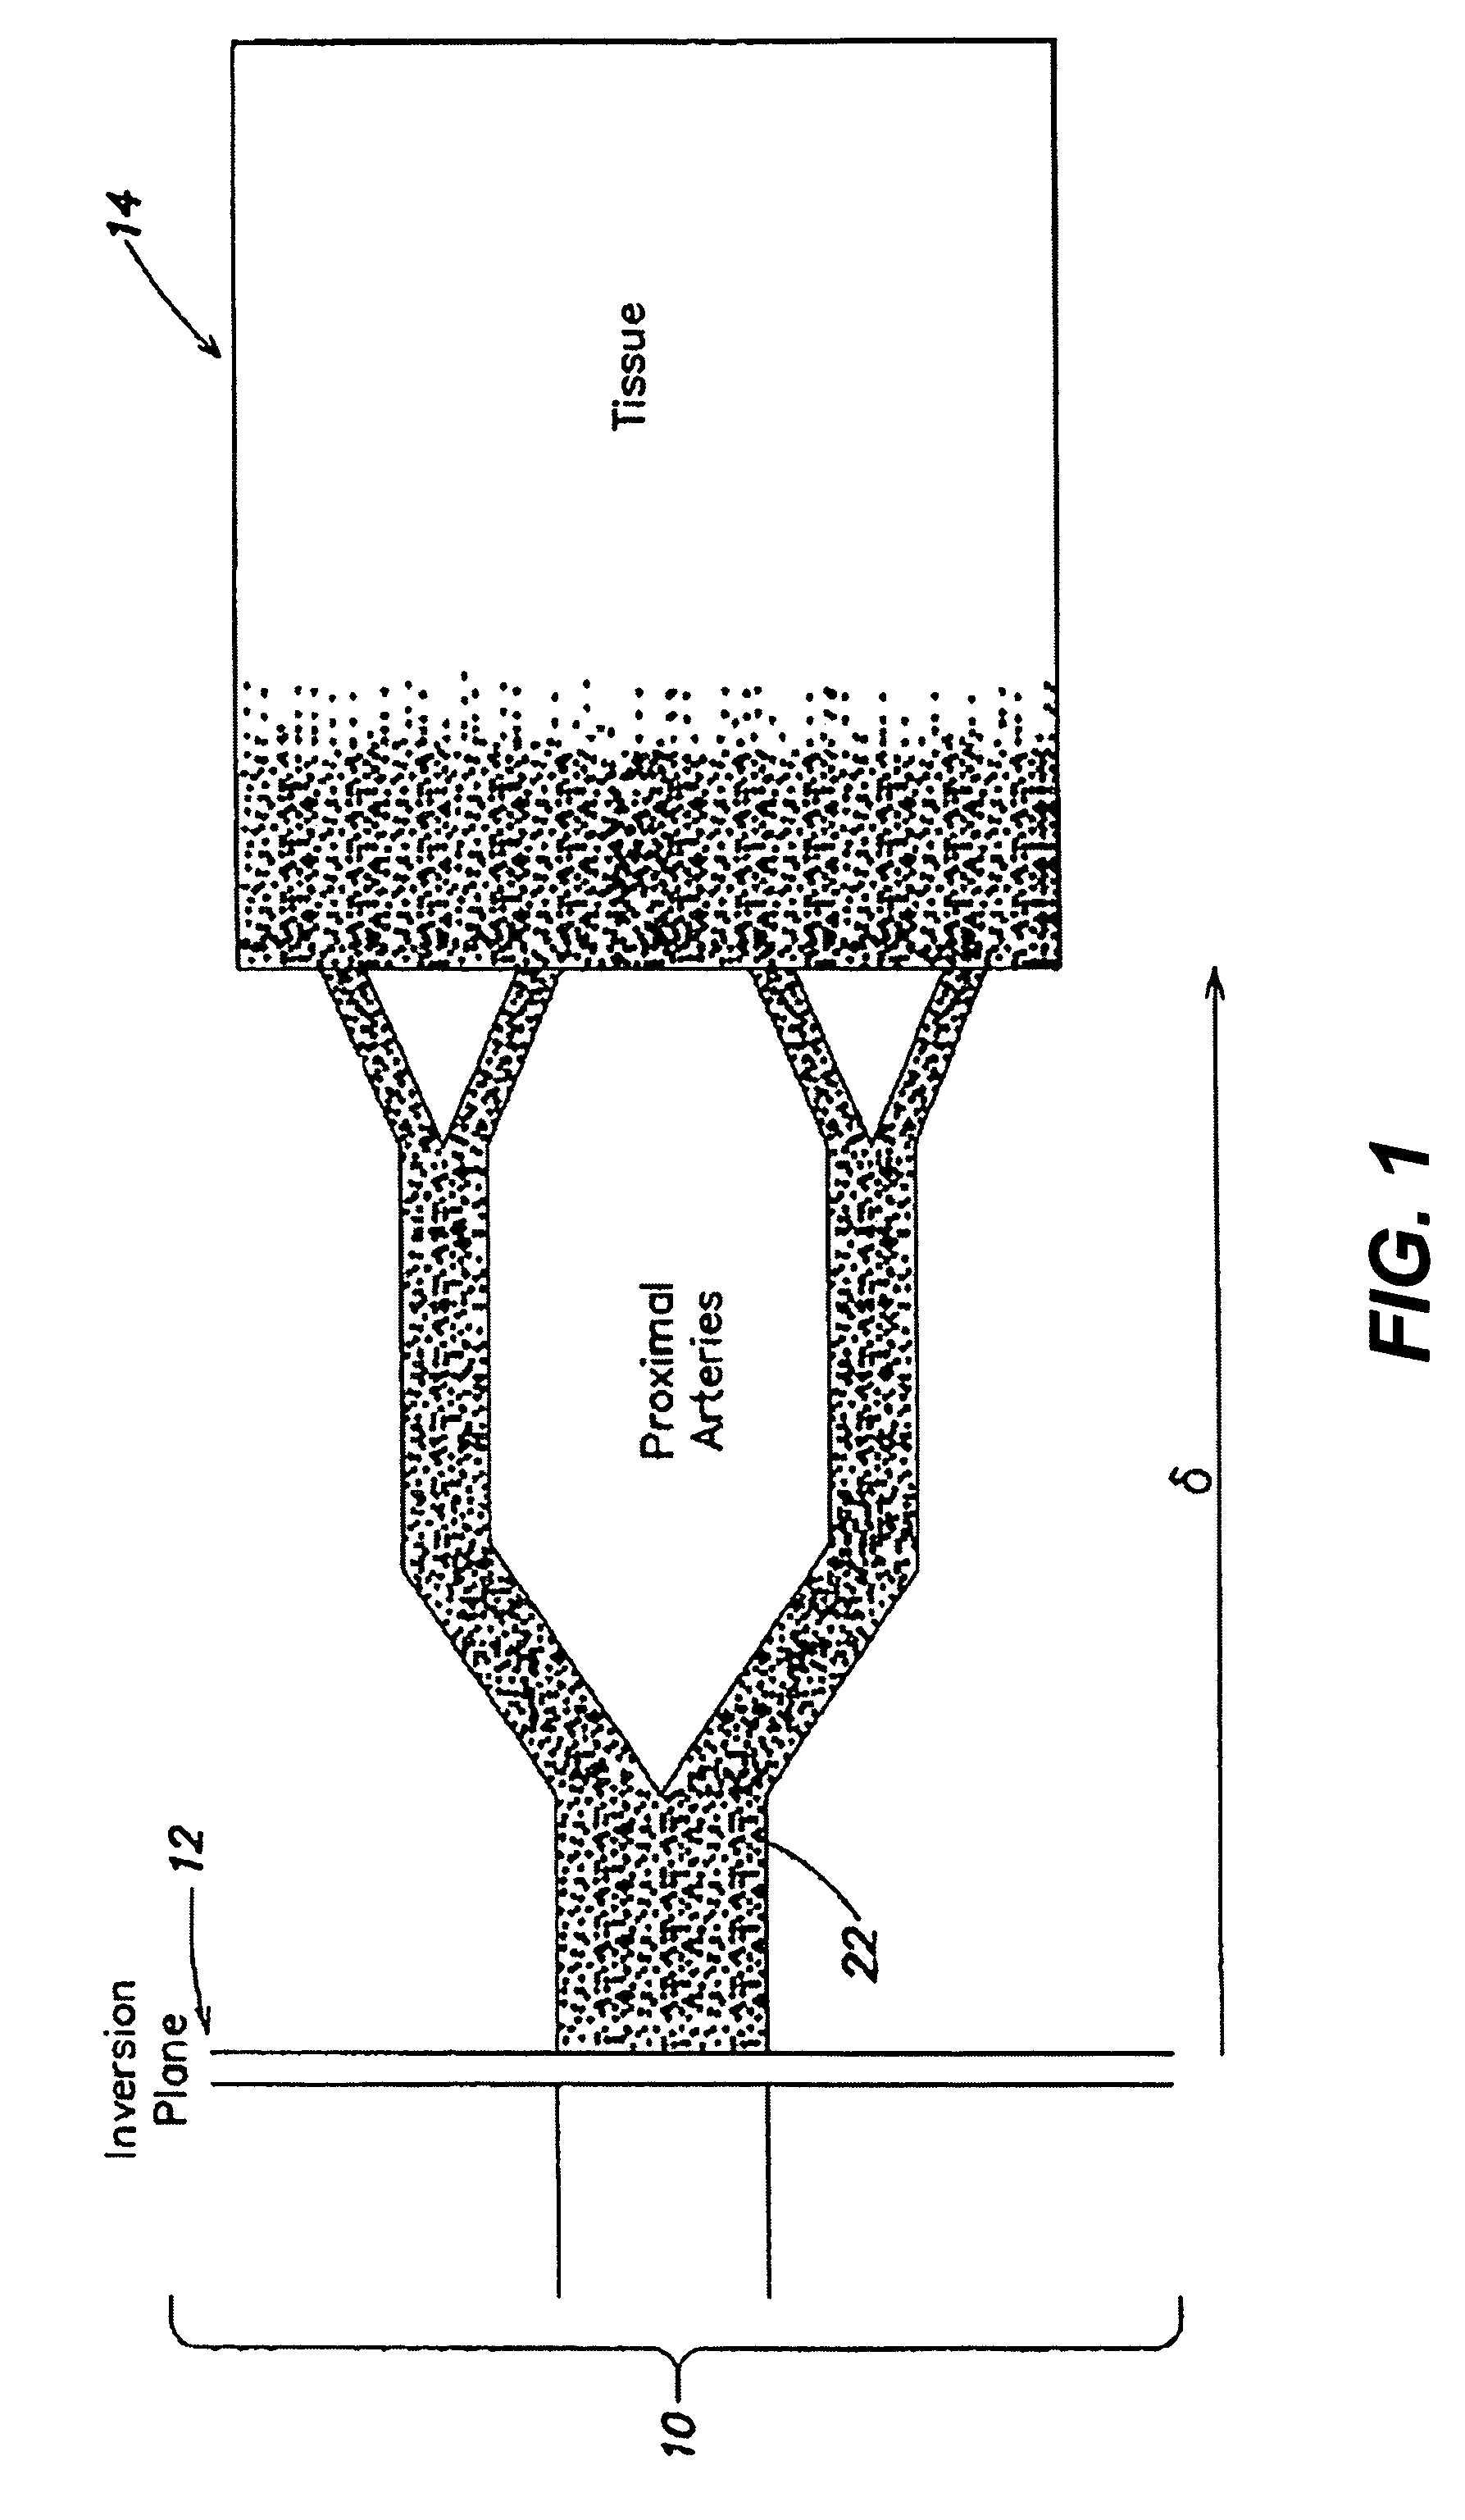 Arterial spin labeling with pulsed radio frequency sequences